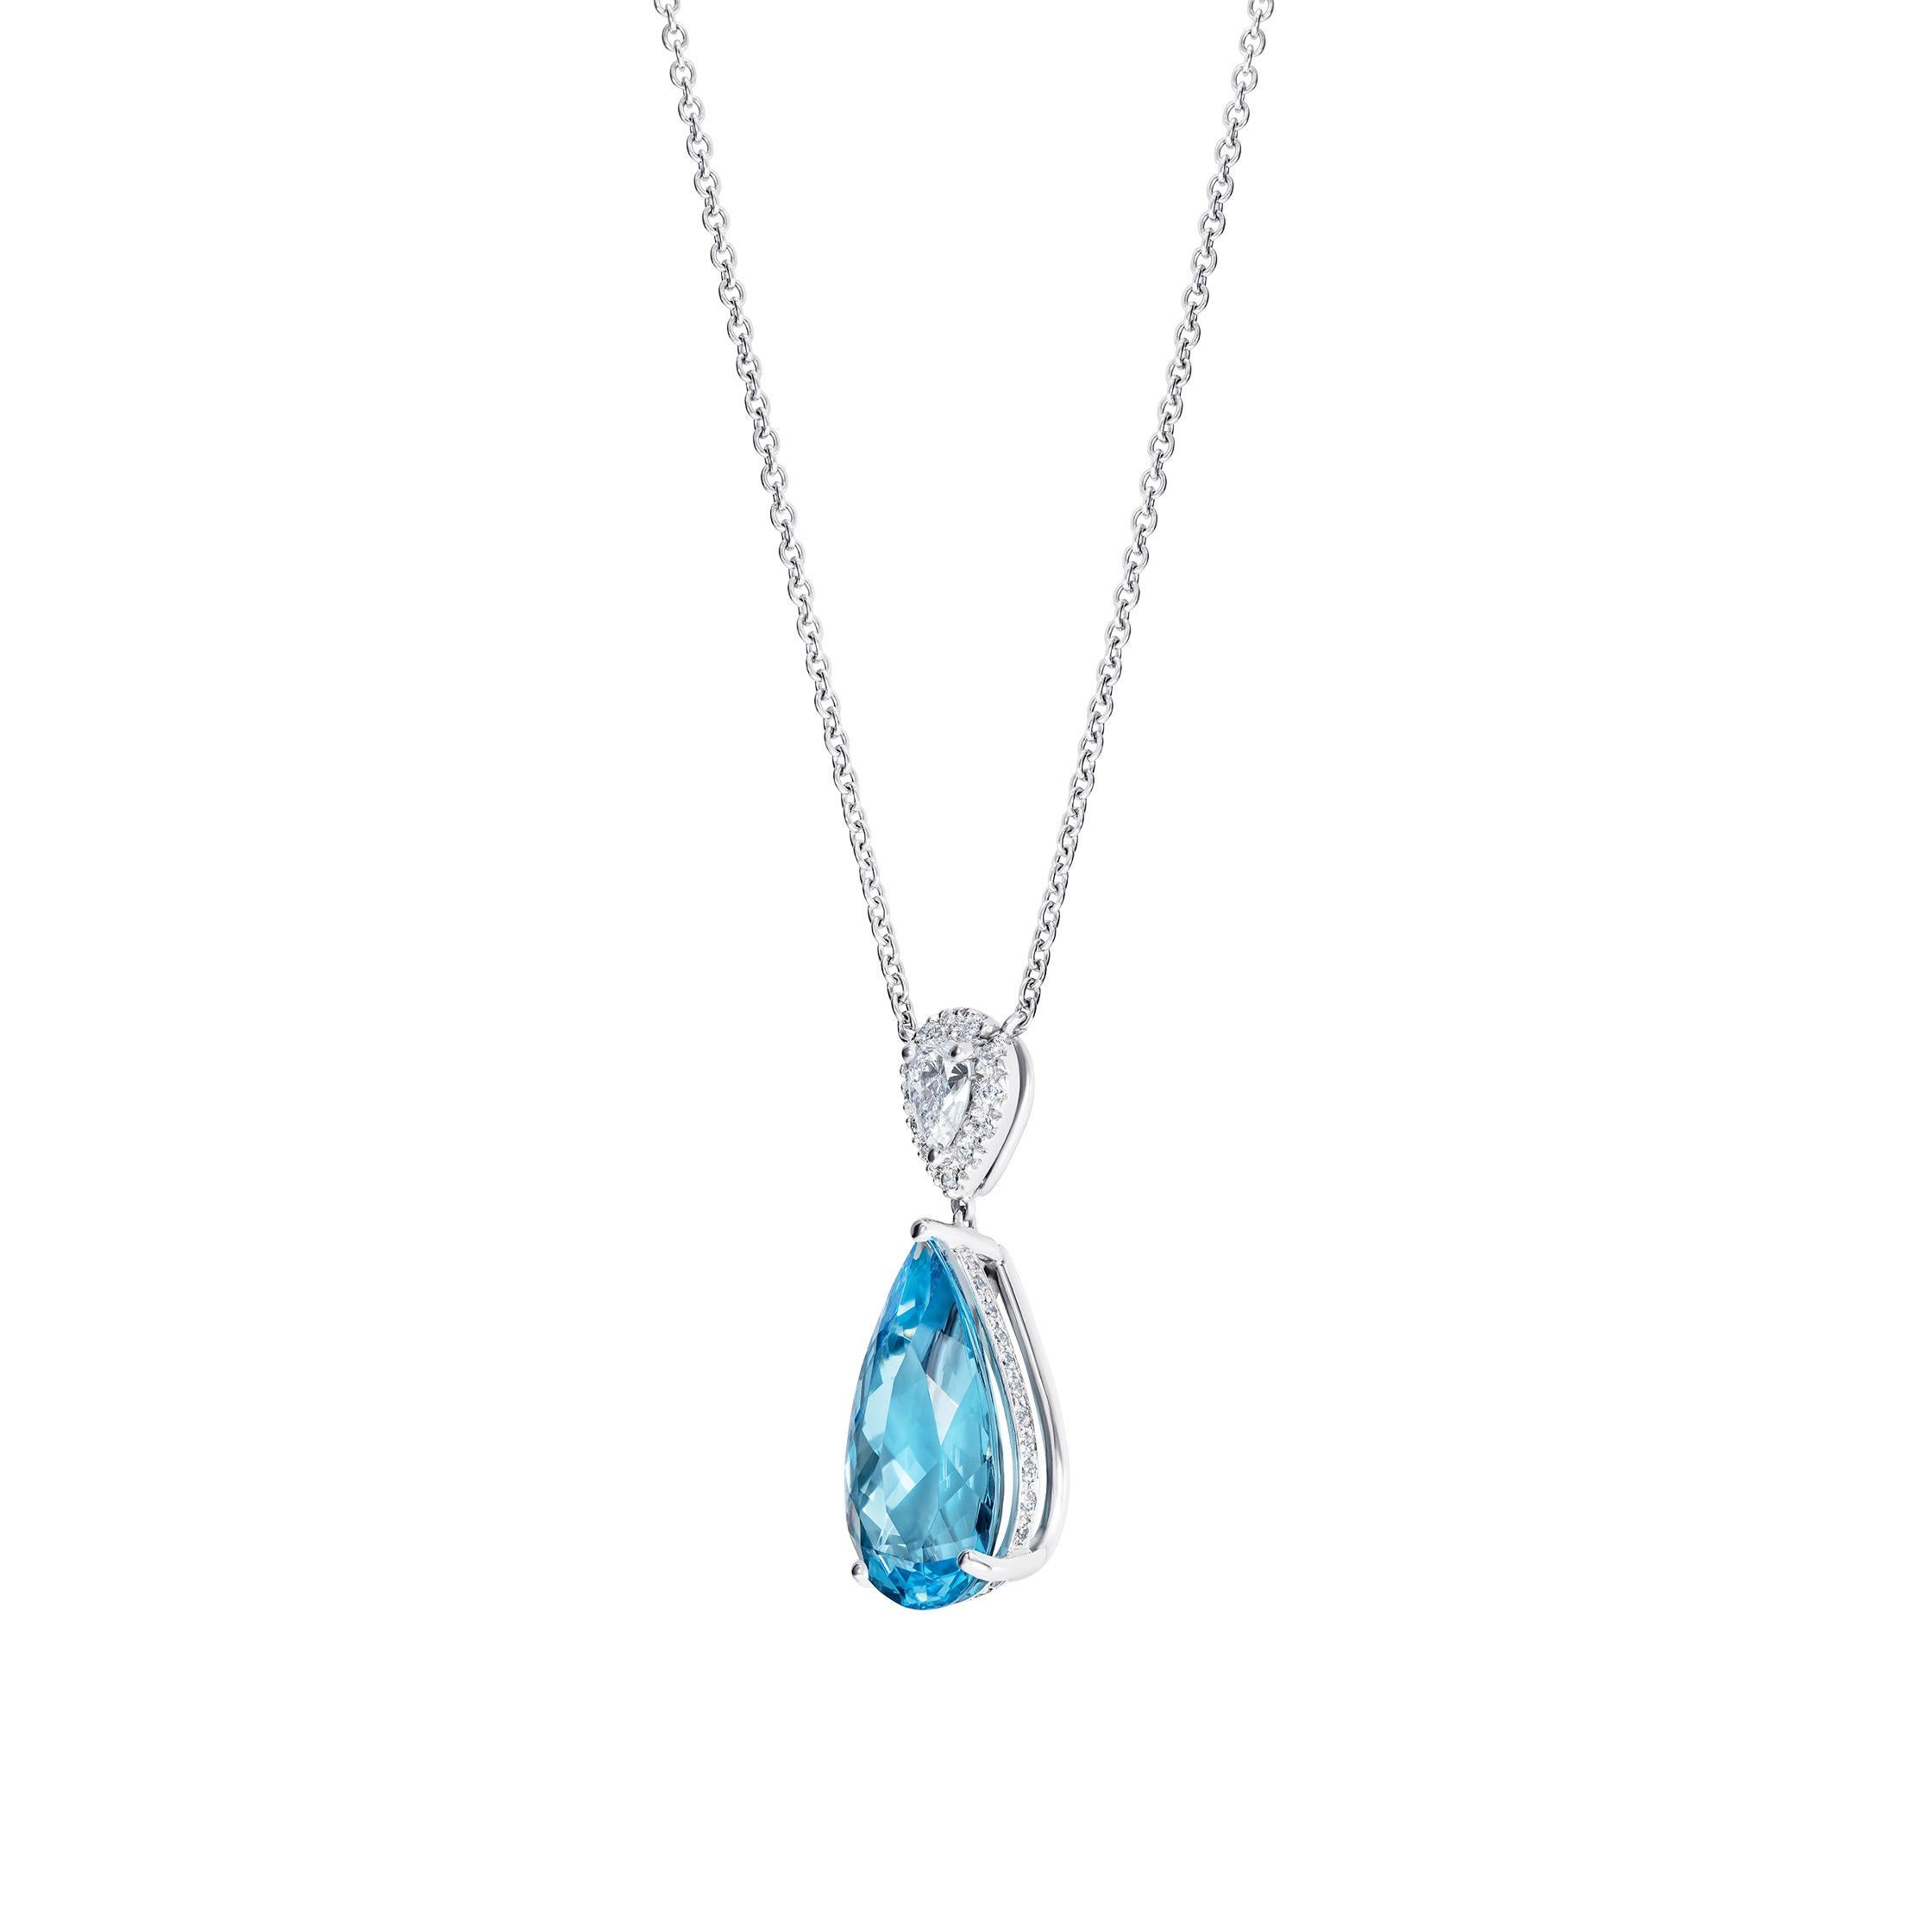 Hirsh Burlington aquamarine and diamond pendant entirely made by hand in our Mayfair atelier.

- 6.31 carat pear shape aquamarine
- 1 pear shape diamond weighing 0.33 carats
- 39 brilliant cut diamonds totalling 0.35 carats
- Created in platinum,